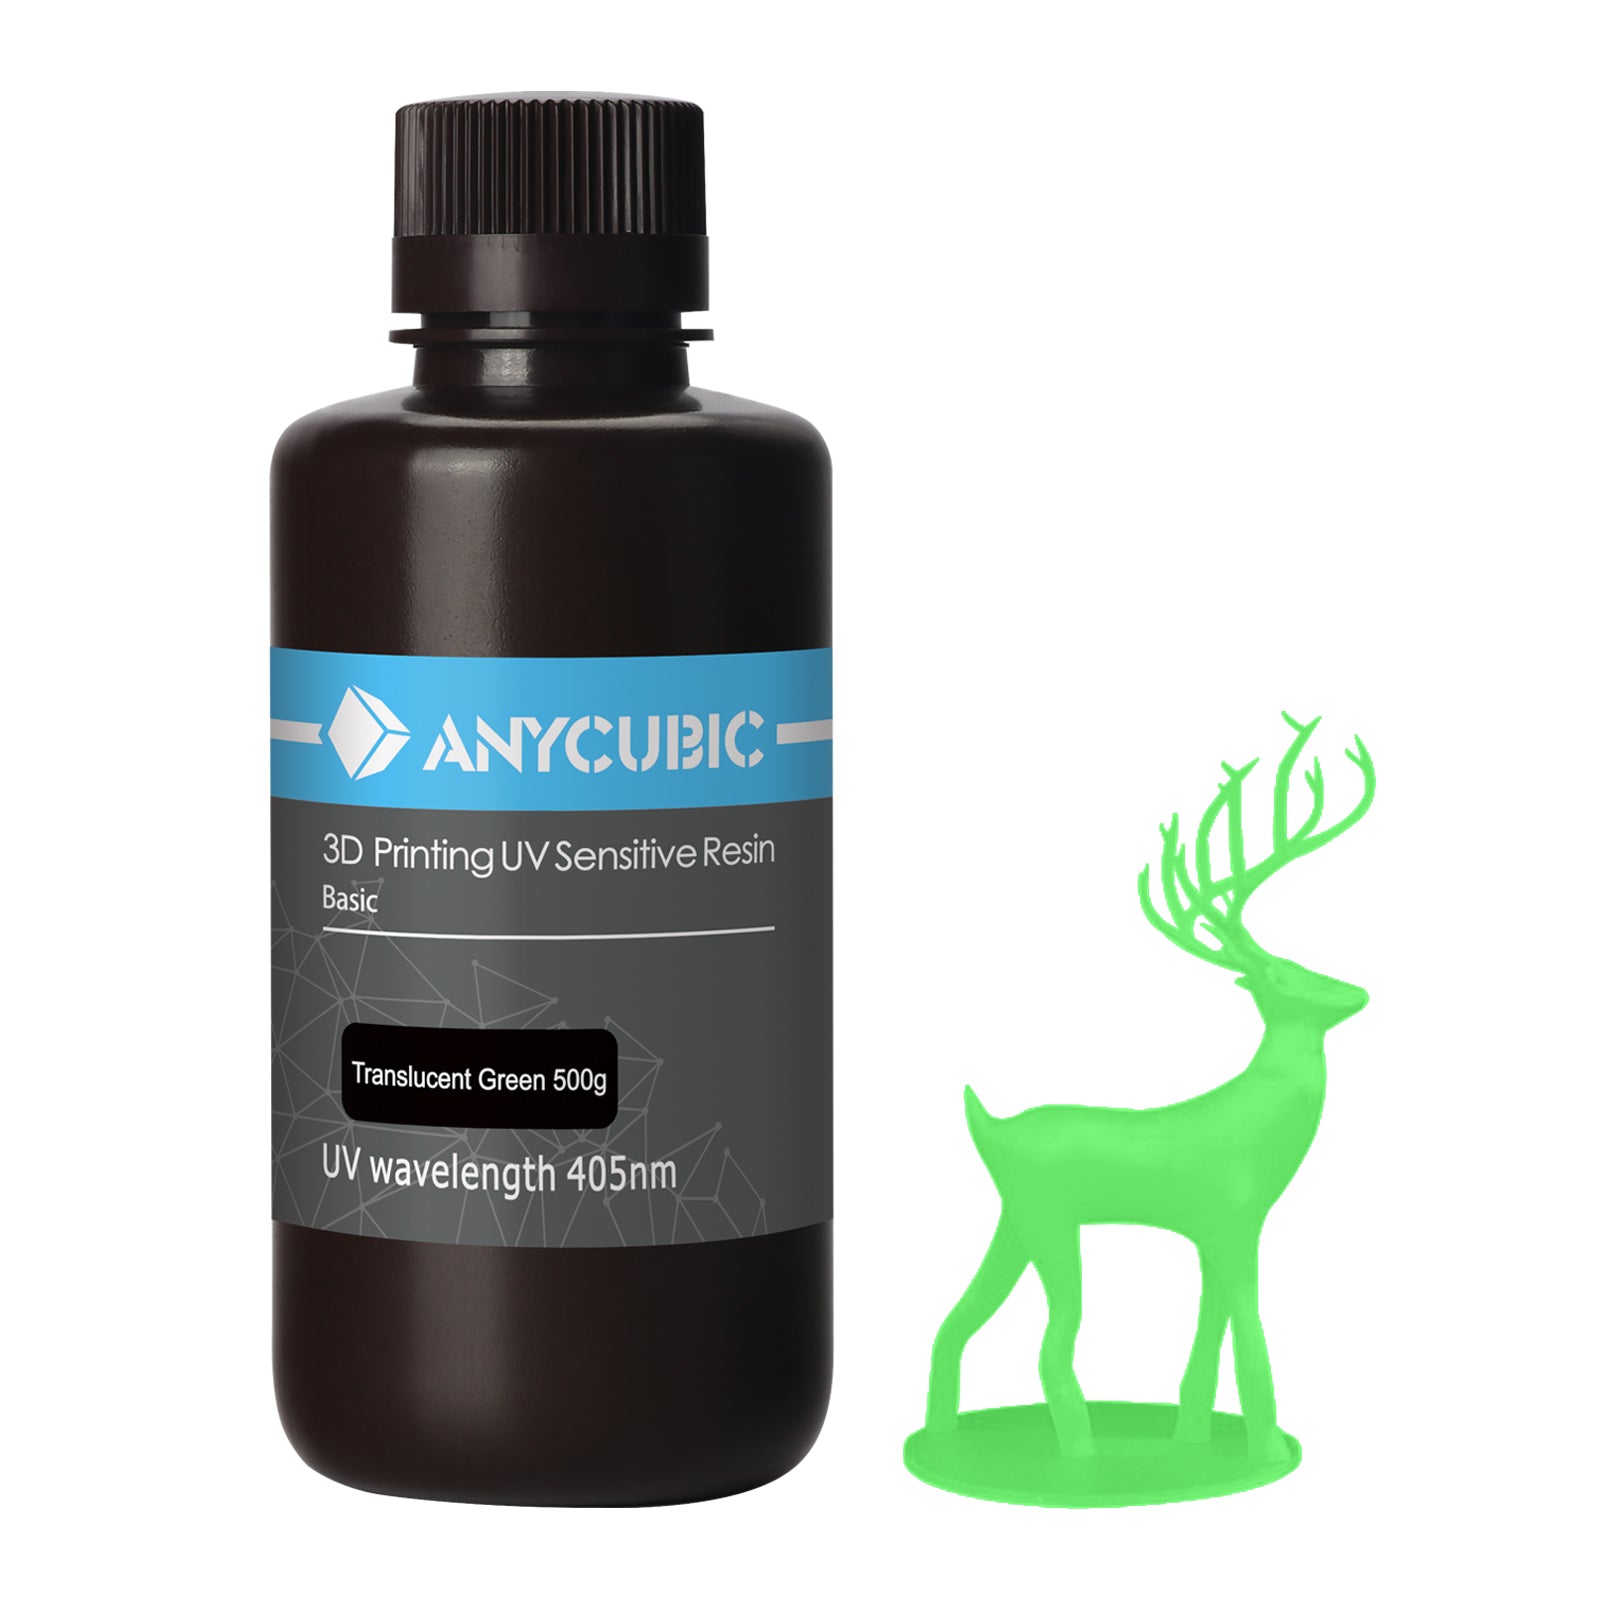 500g ANYCUBIC 3D Printer Resin 405nm LCD Quick-Curing for LCD 3D Printing Black Grey Green